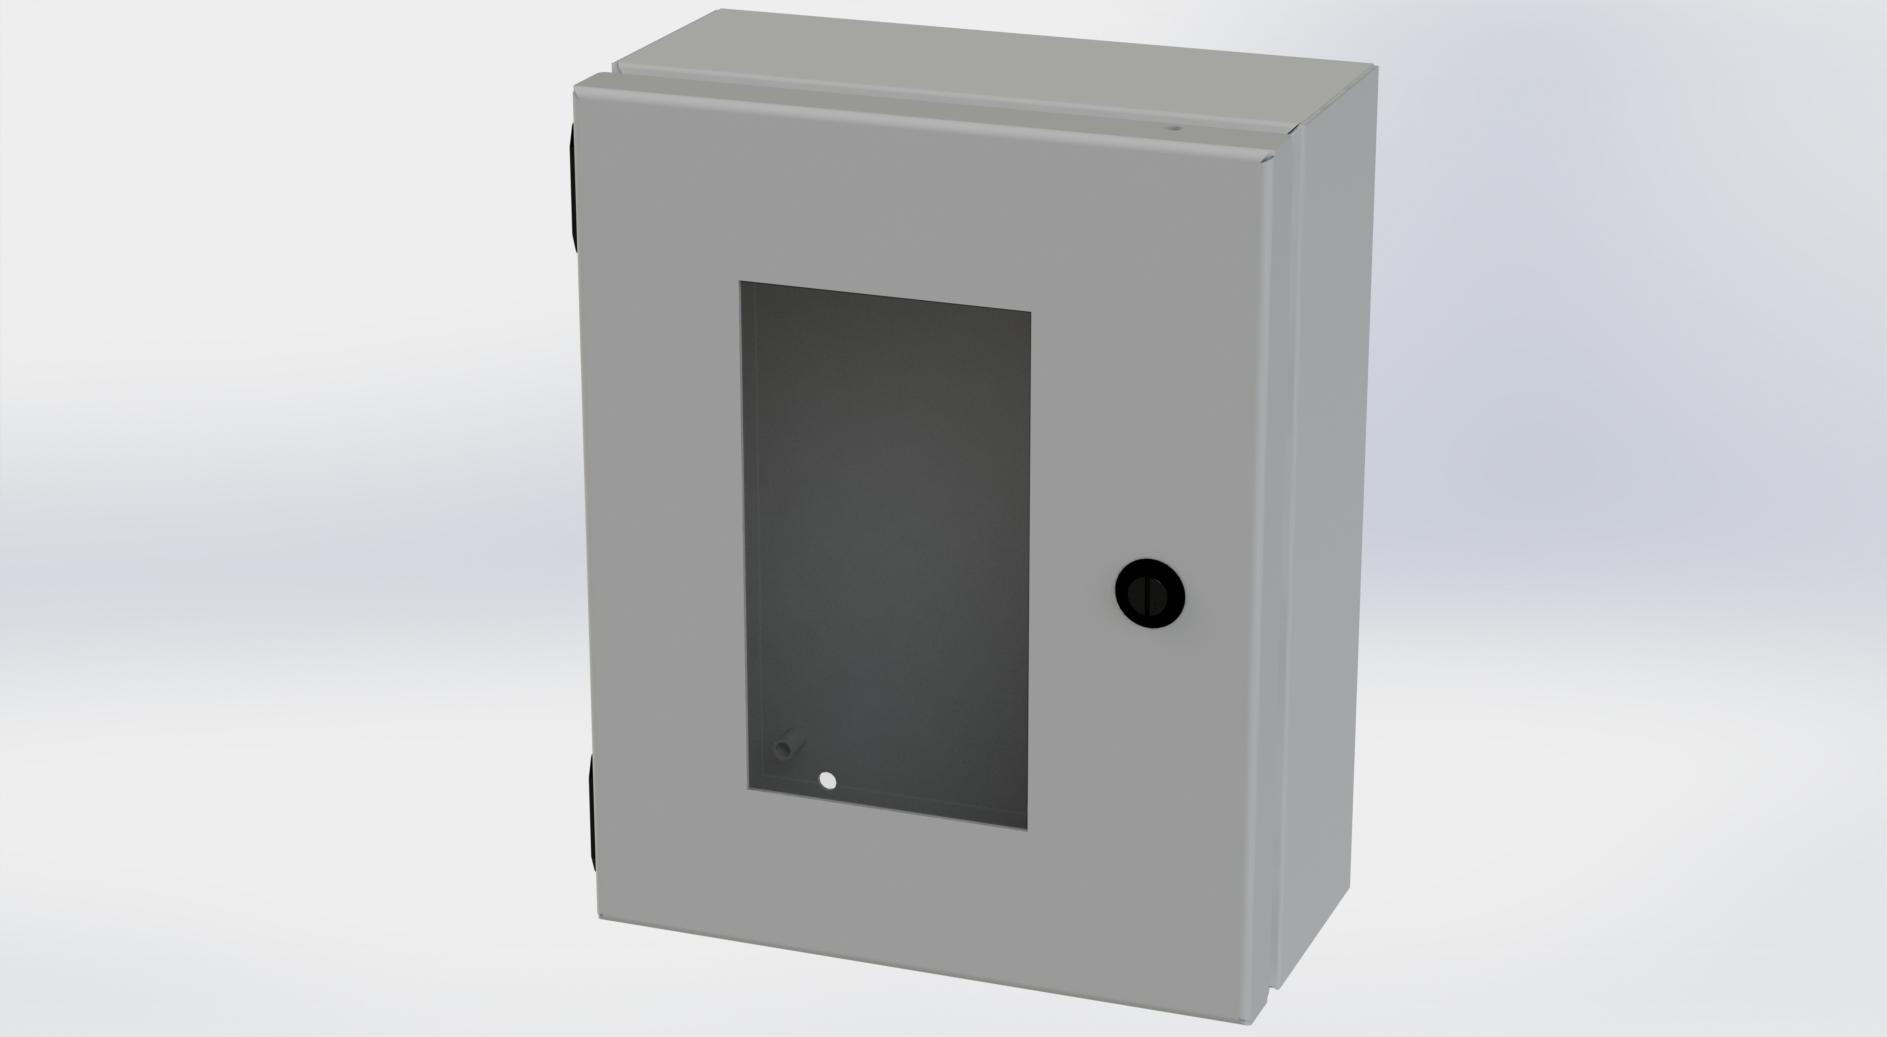 Saginaw Control SCE-1008ELJW ELJ Enclosure W/Viewing Window, Height:10.00", Width:8.00", Depth:4.00", ANSI-61 gray powder coating inside and out. Optional sub-panels are powder coated white.